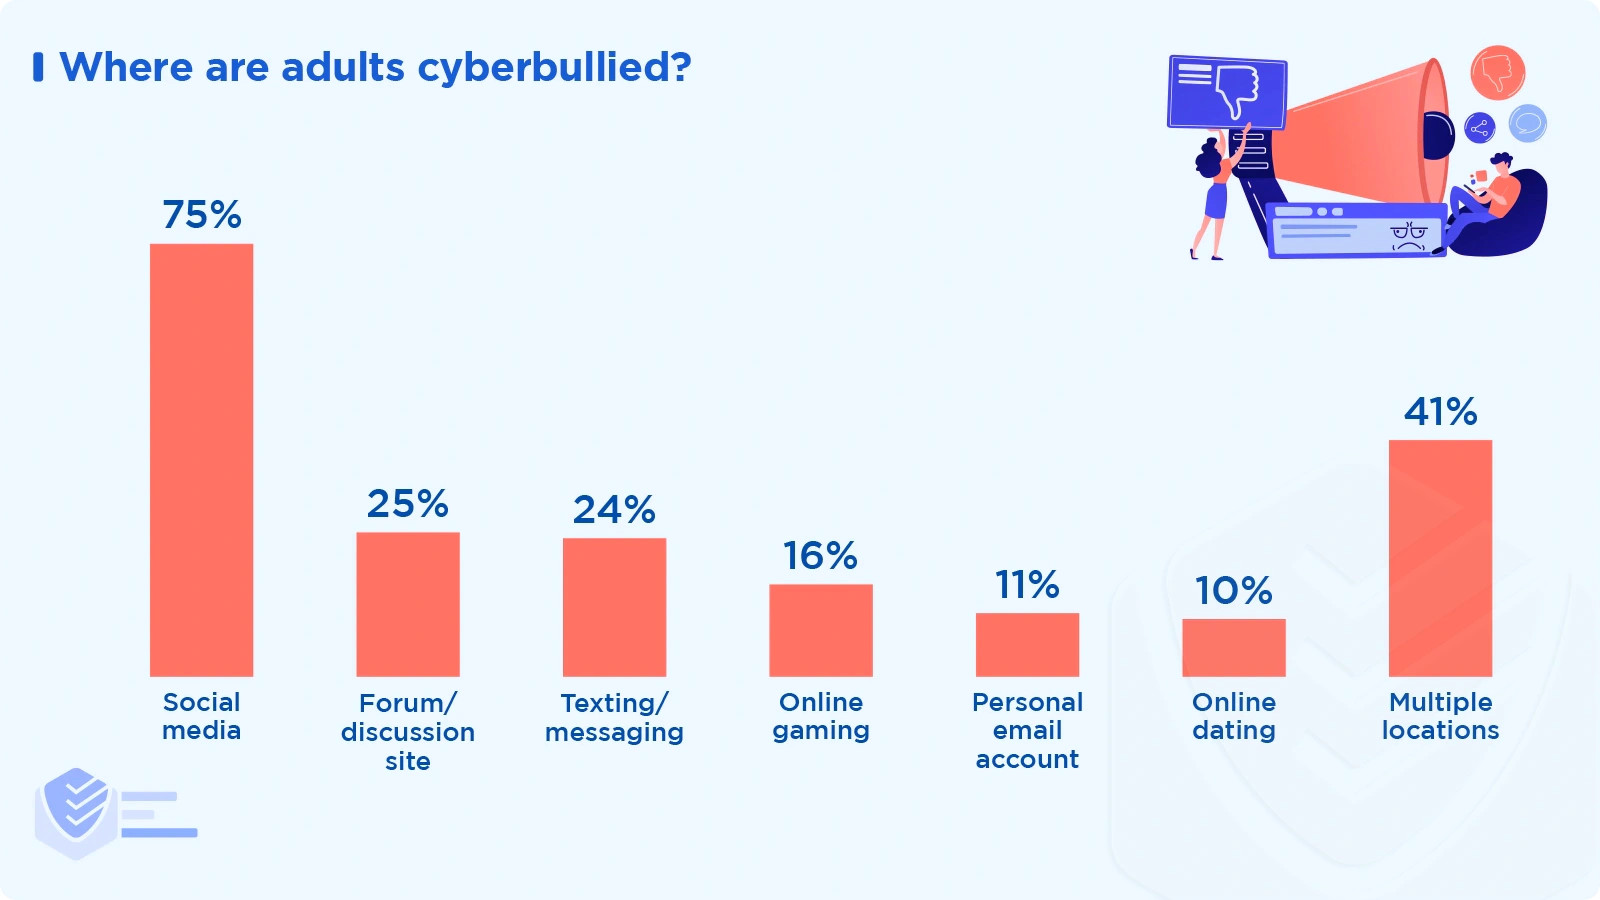 Places where adults are cyberbullied